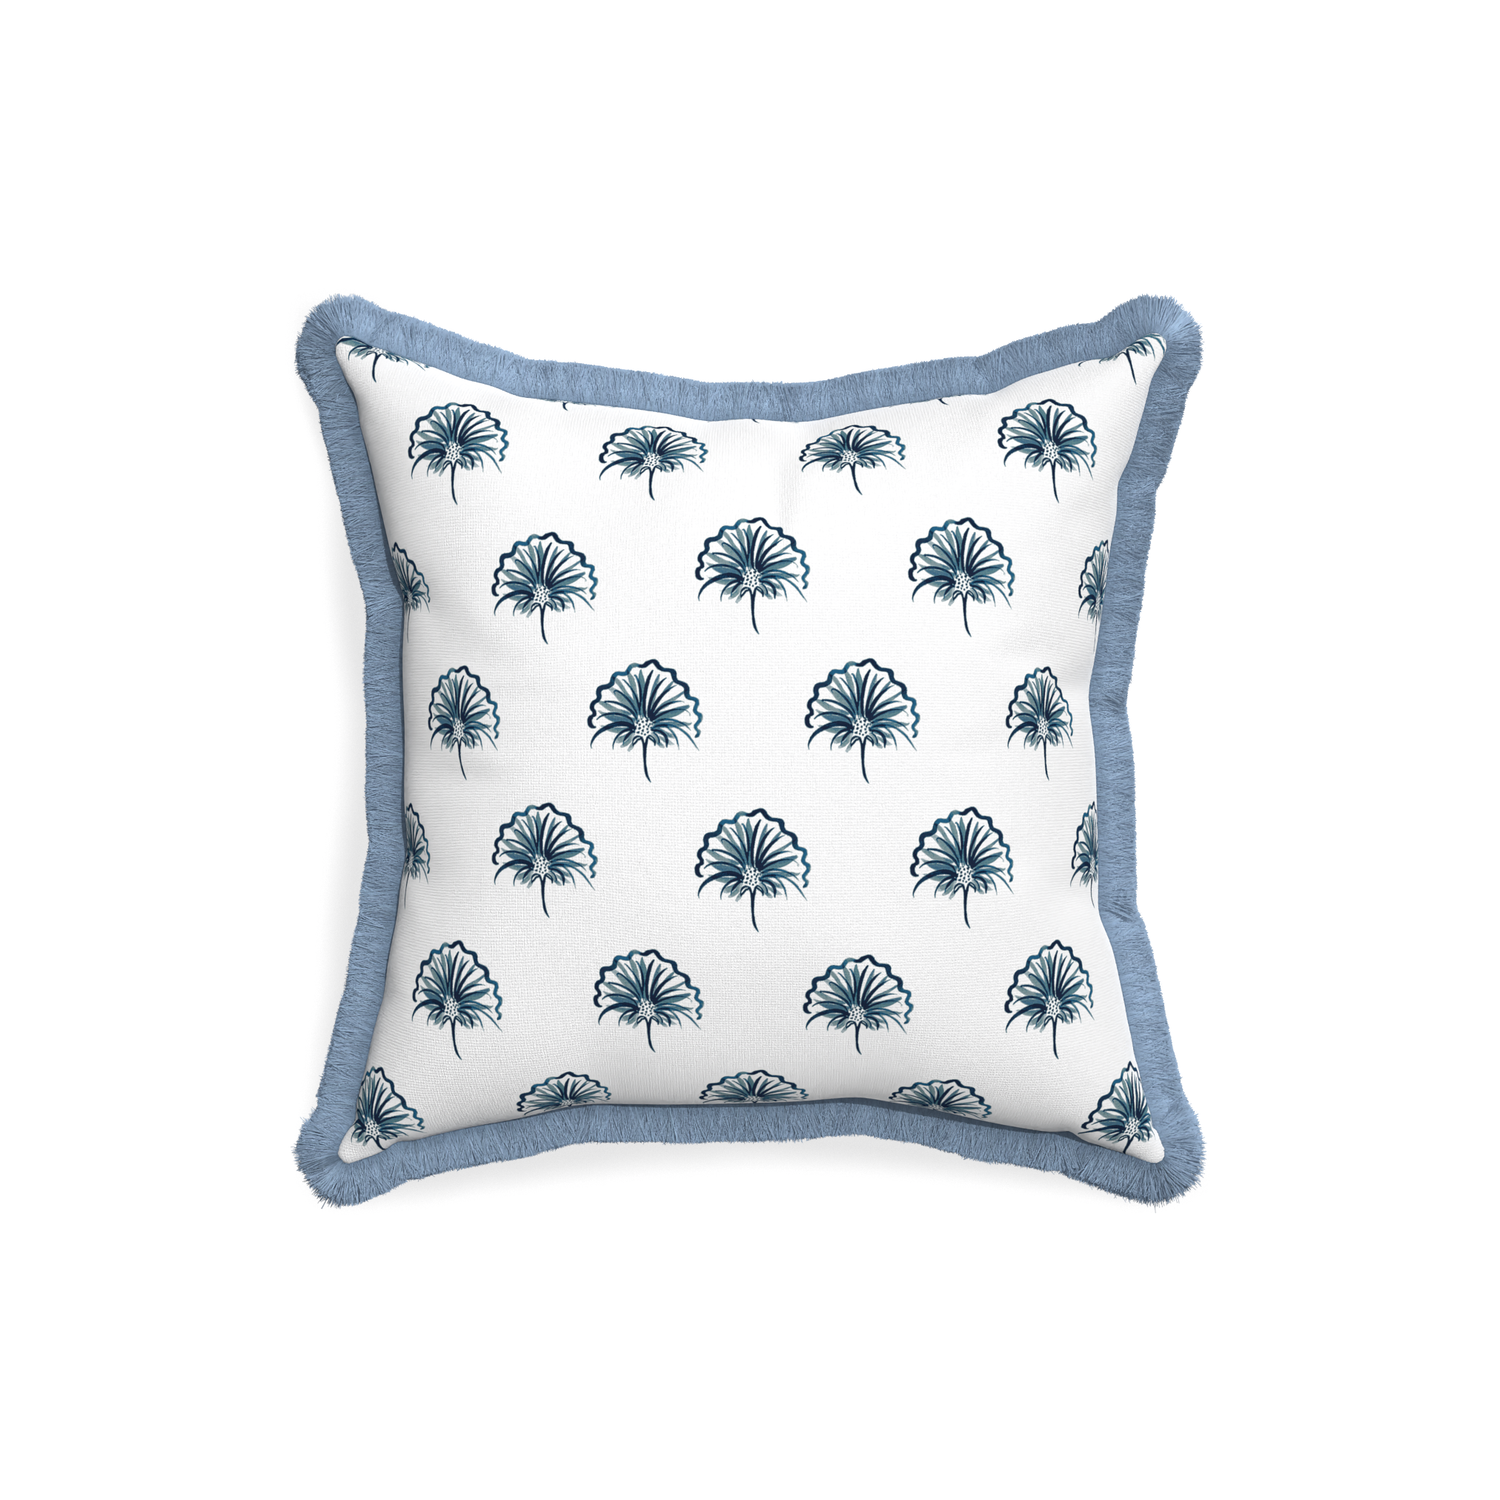 18-square penelope midnight custom floral navypillow with sky fringe on white background